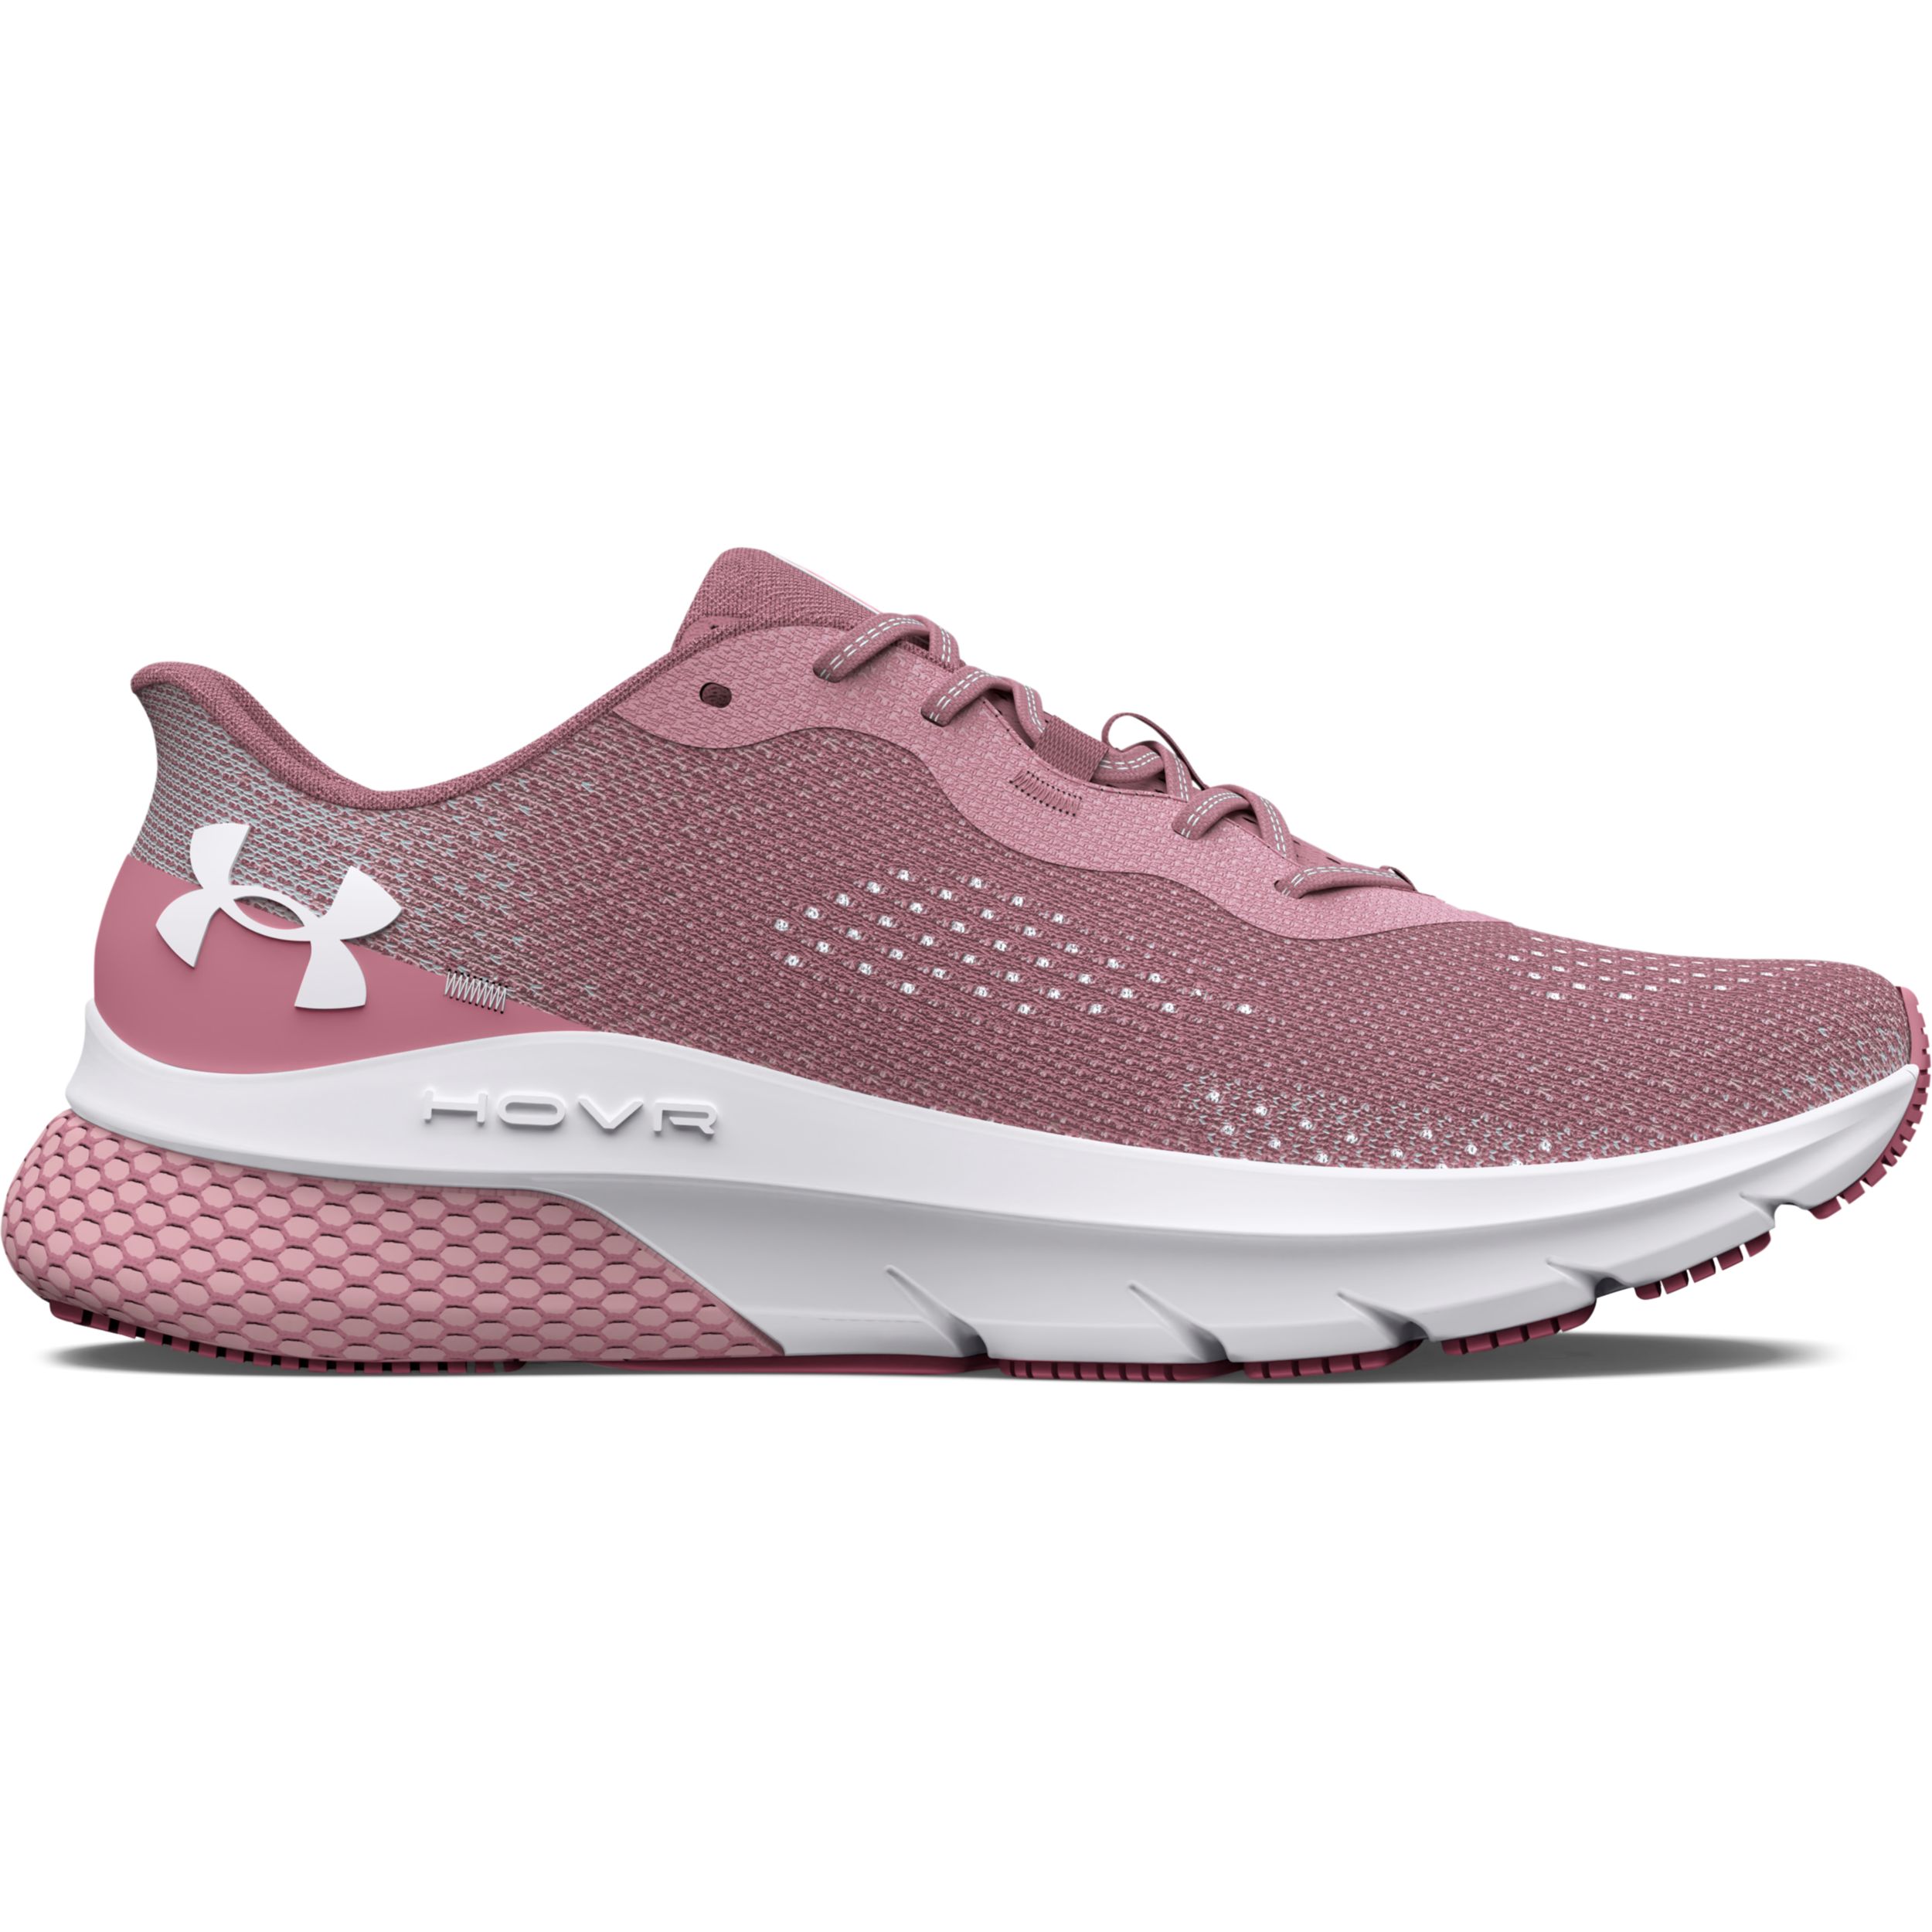 Under Armour Women's HOVR™ Turbulence 2 Running Shoes